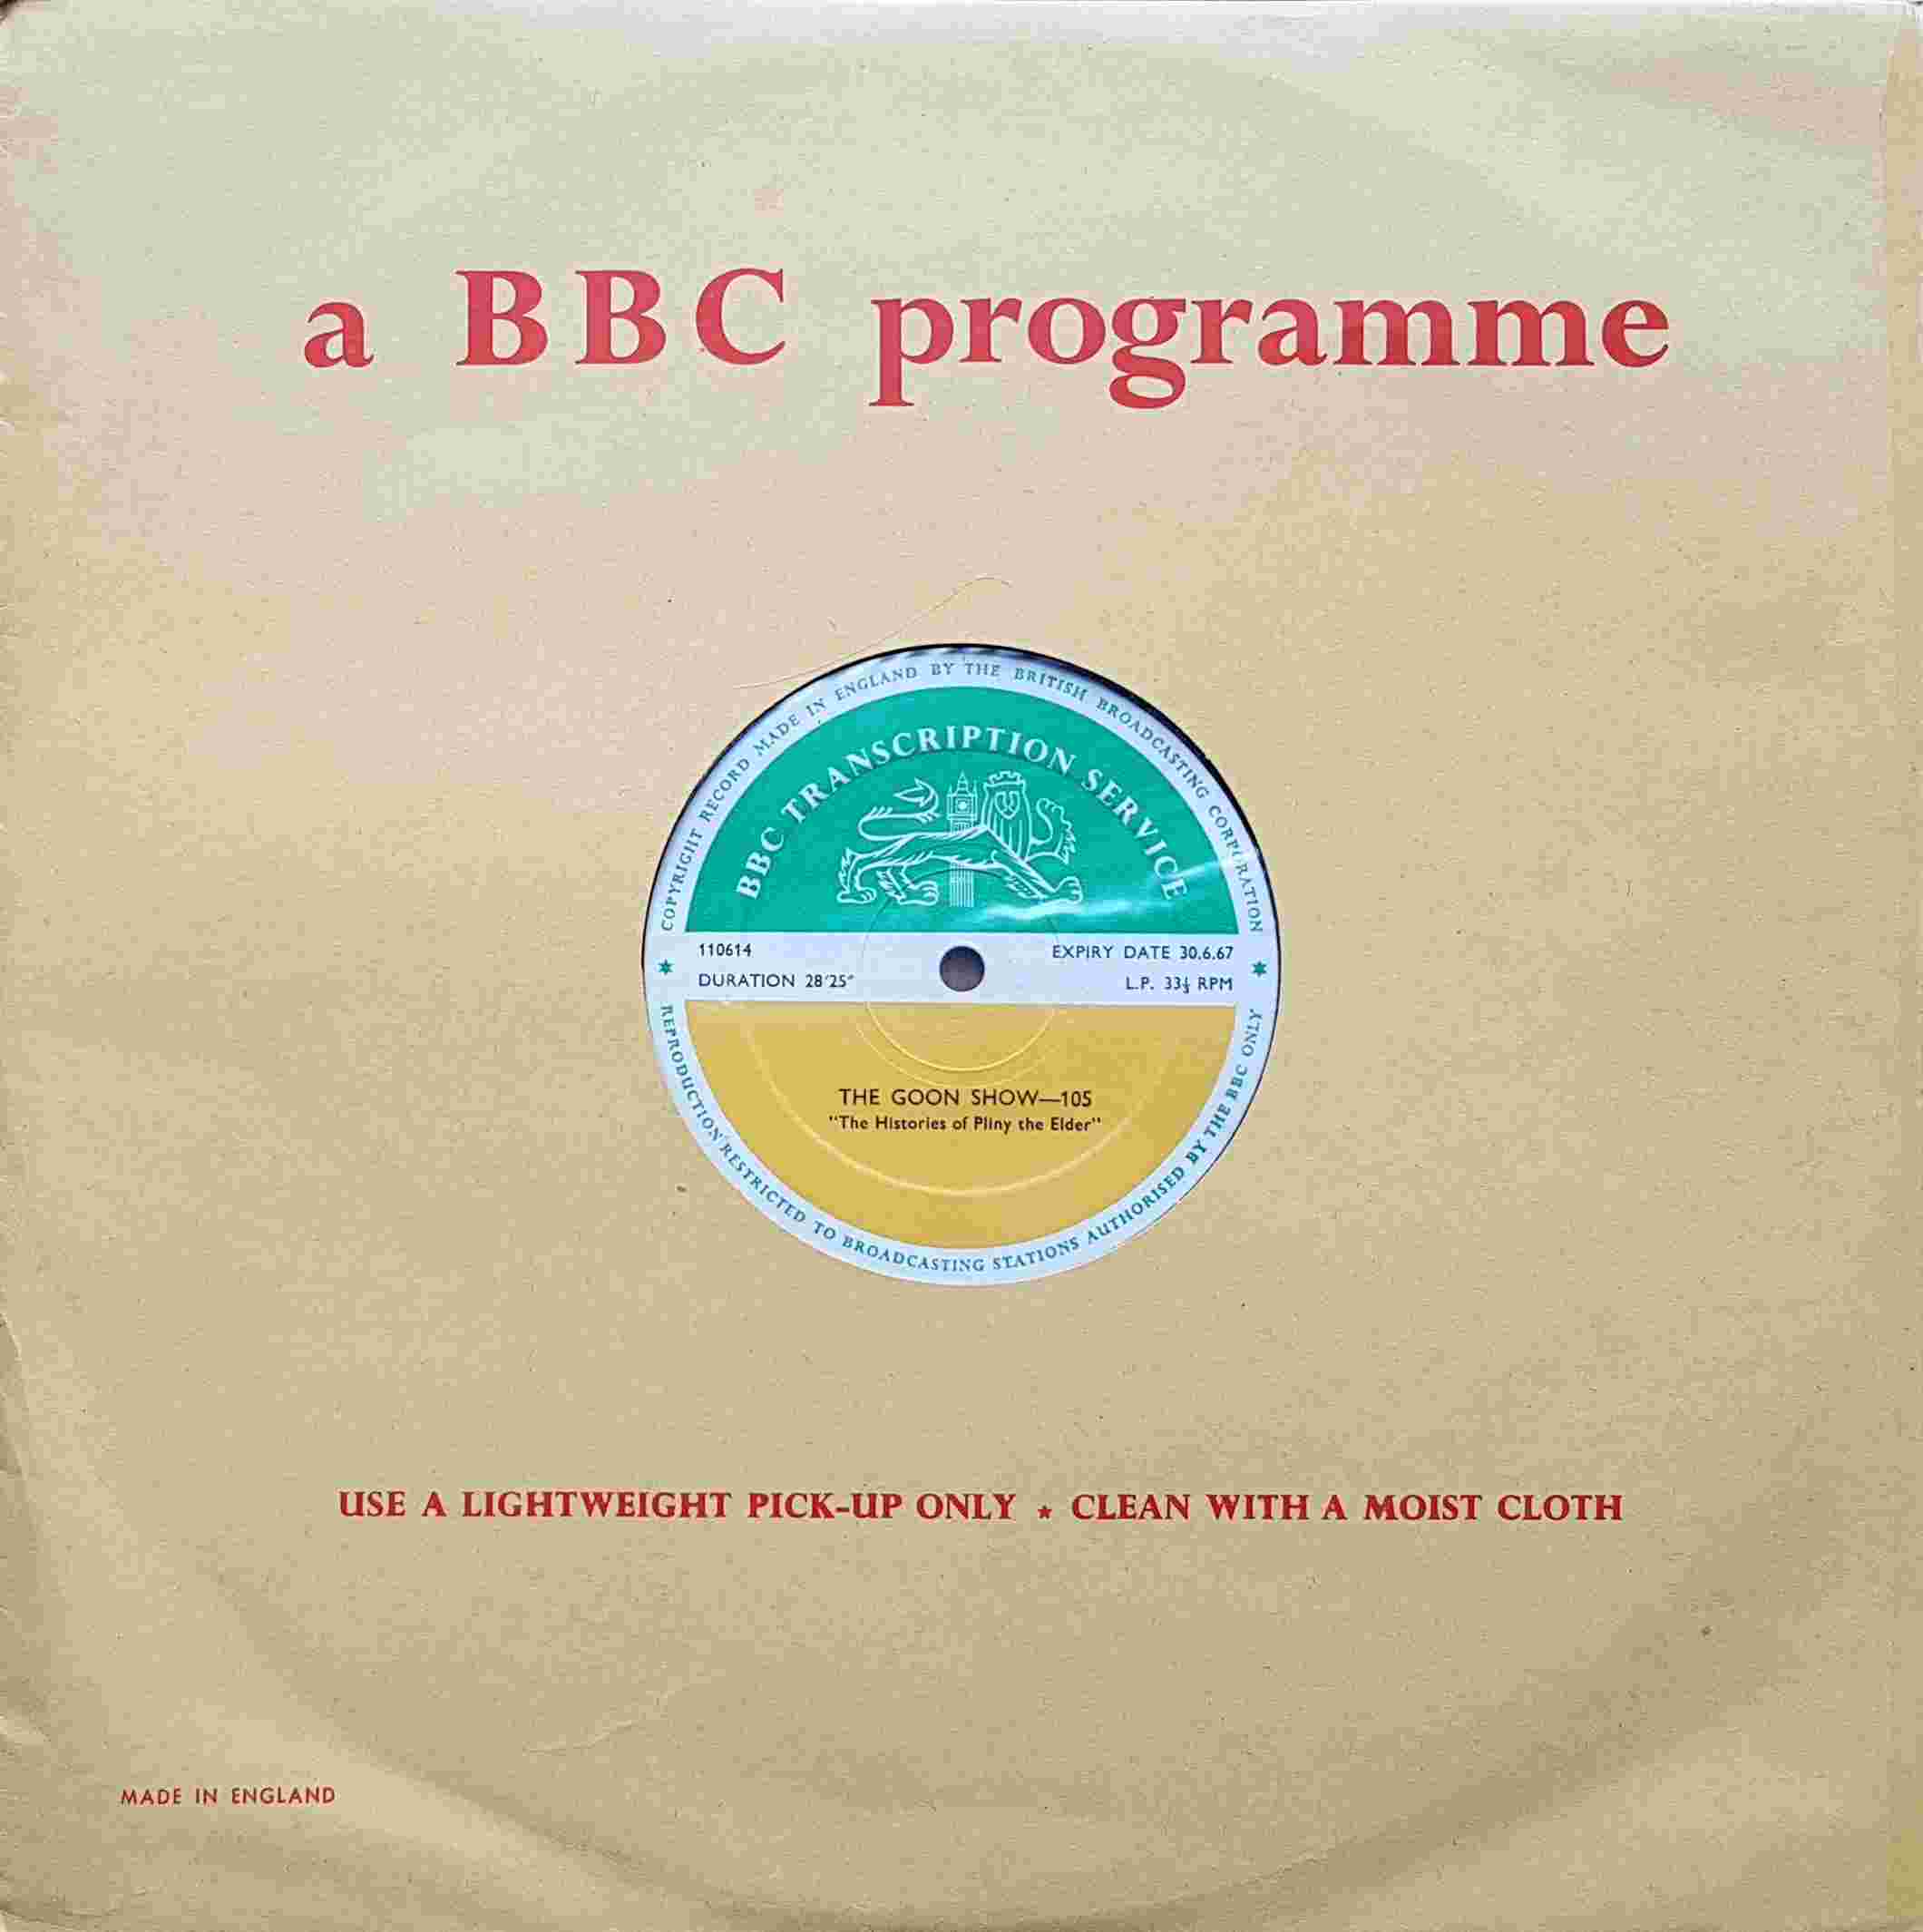 Picture of 110614 The Goon show - 105 & 106 by artist Spike Milligan / Larry Stevens / Maurice Wiltshire from the BBC albums - Records and Tapes library